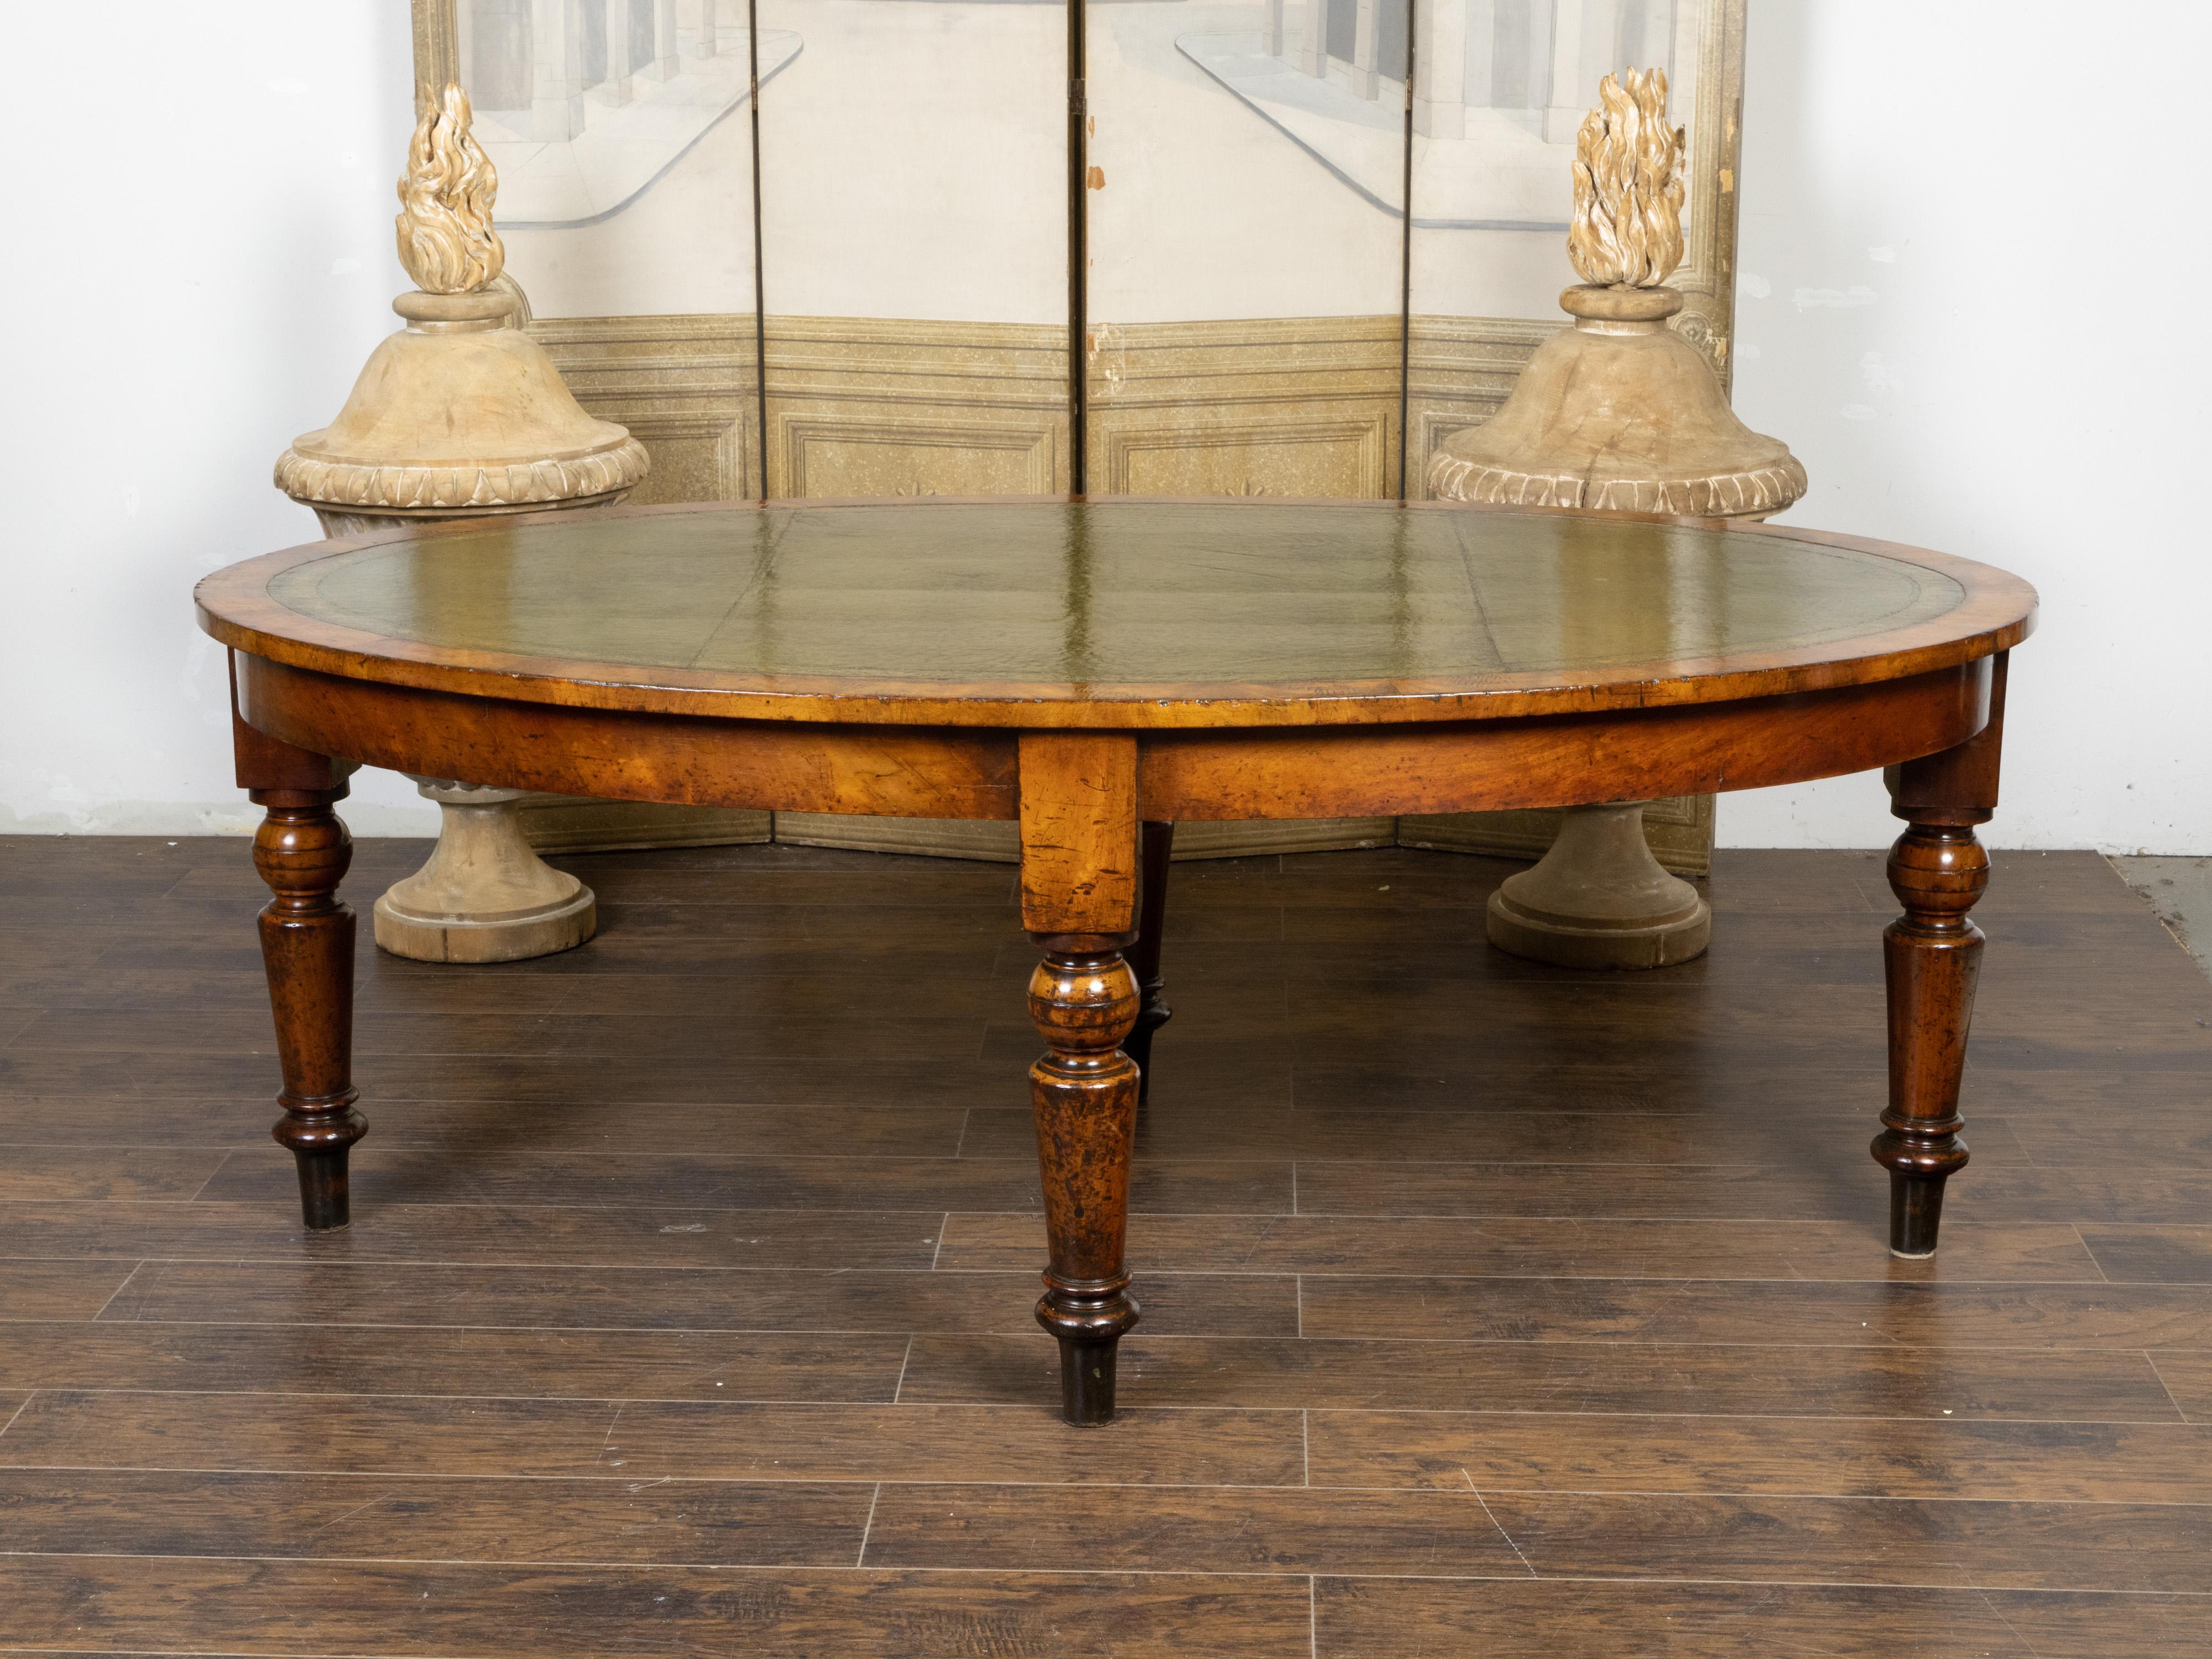 An English oval mahogany table from the 19th century, with green leather top, gilt and tooled arabesques, turned legs and nice patina. Created in England during the 19th century, this mahogany table features a green leather oval top accented with